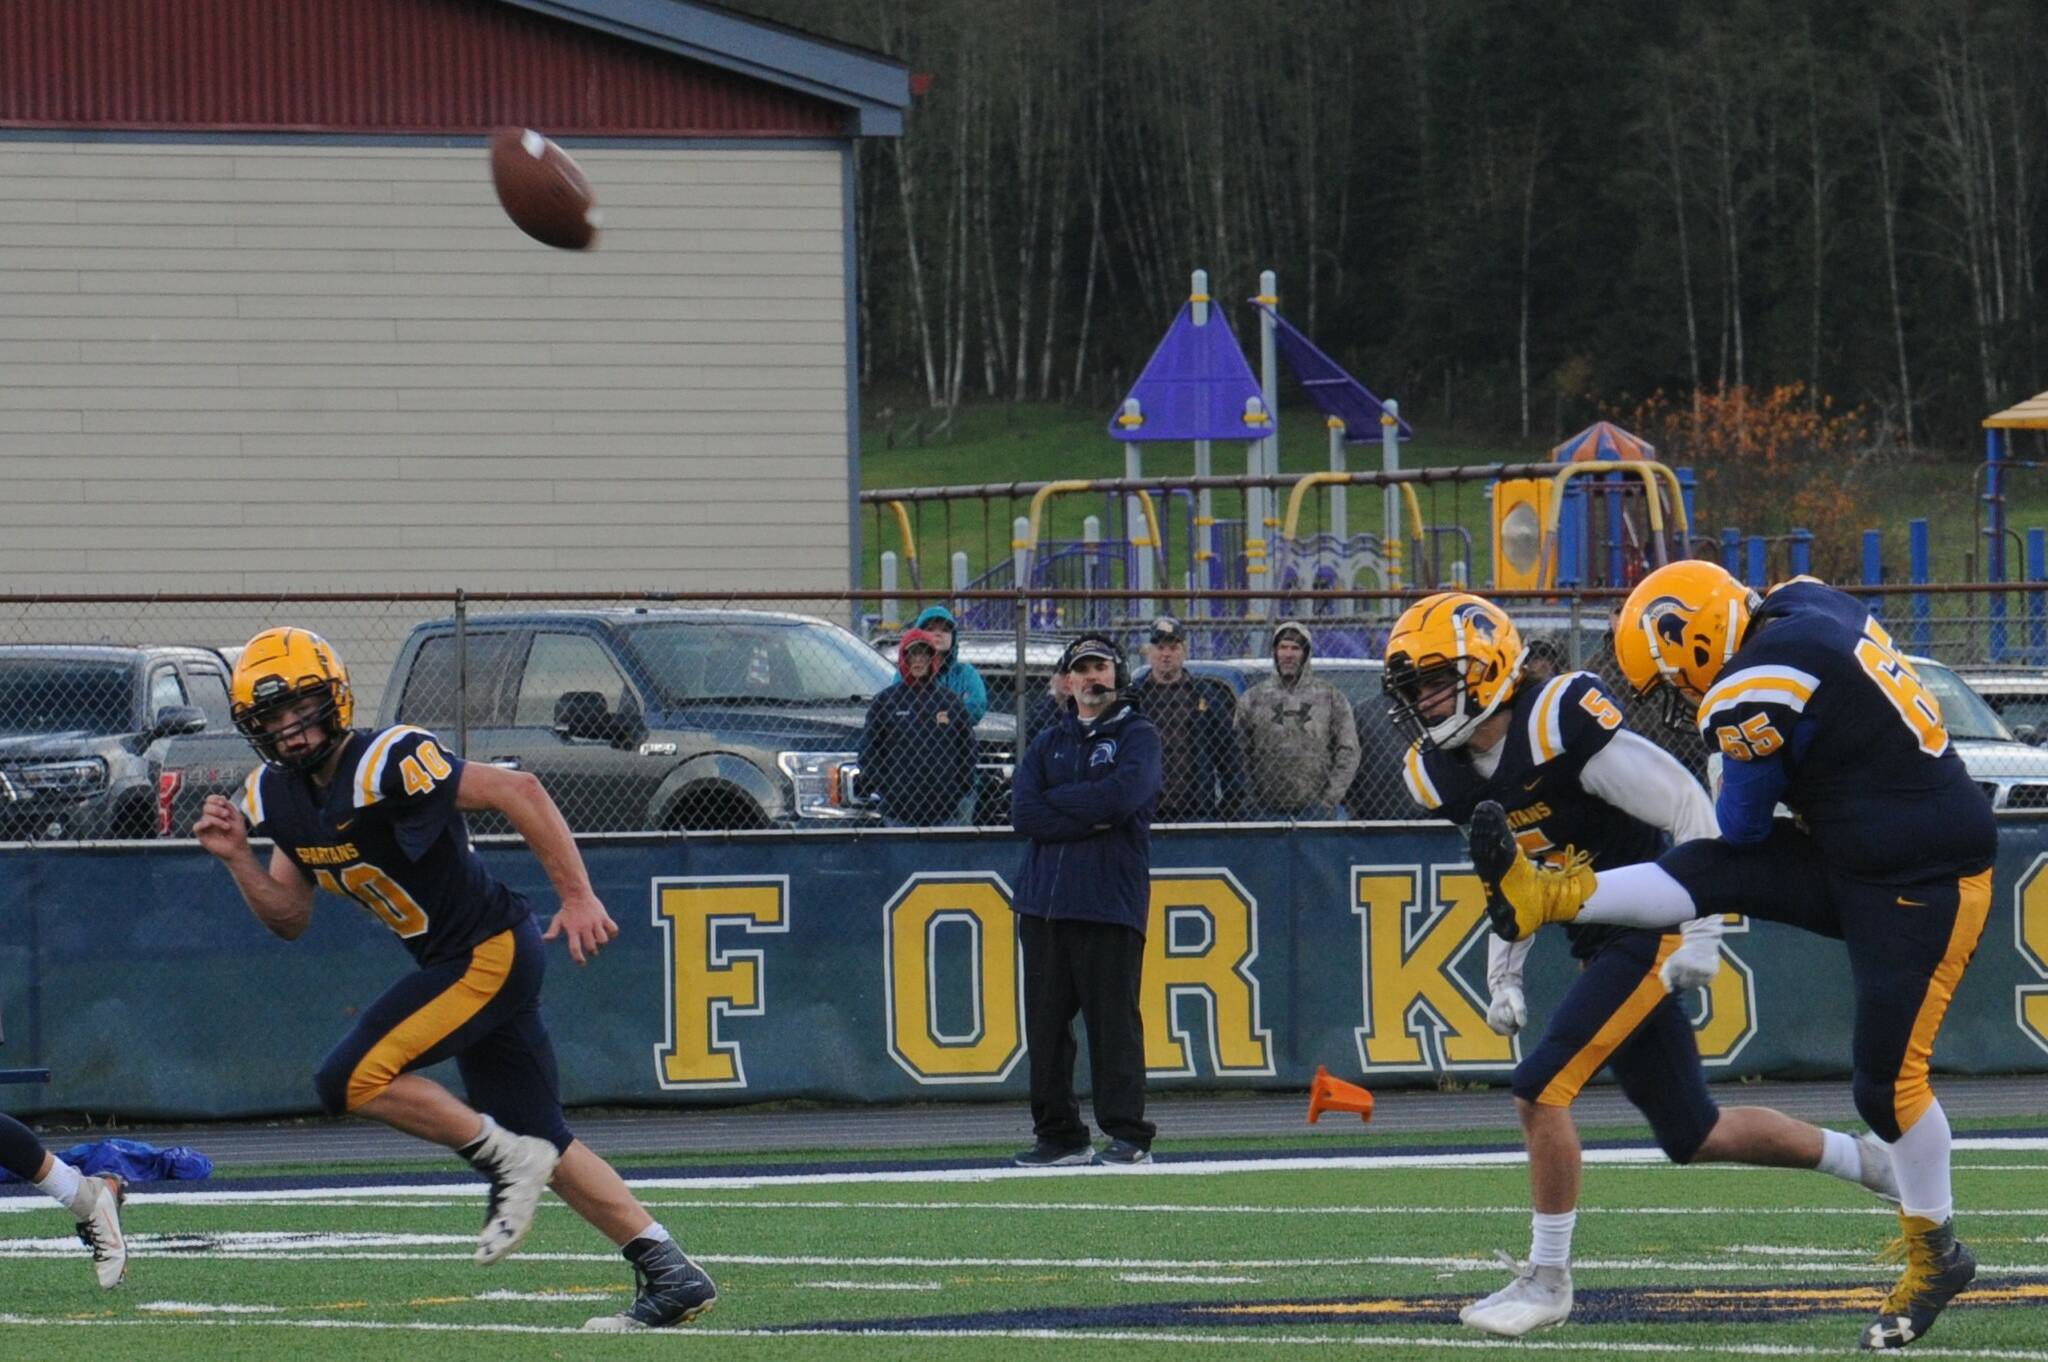 Forks head coach Trevor Highfield looks on while Spartan kicker Hector Dominguez kicks the ball into the endzone.  Also in the action are Nate Dahlgren (40) and Landon Davis (5).  Photo by Lonnie Archibald